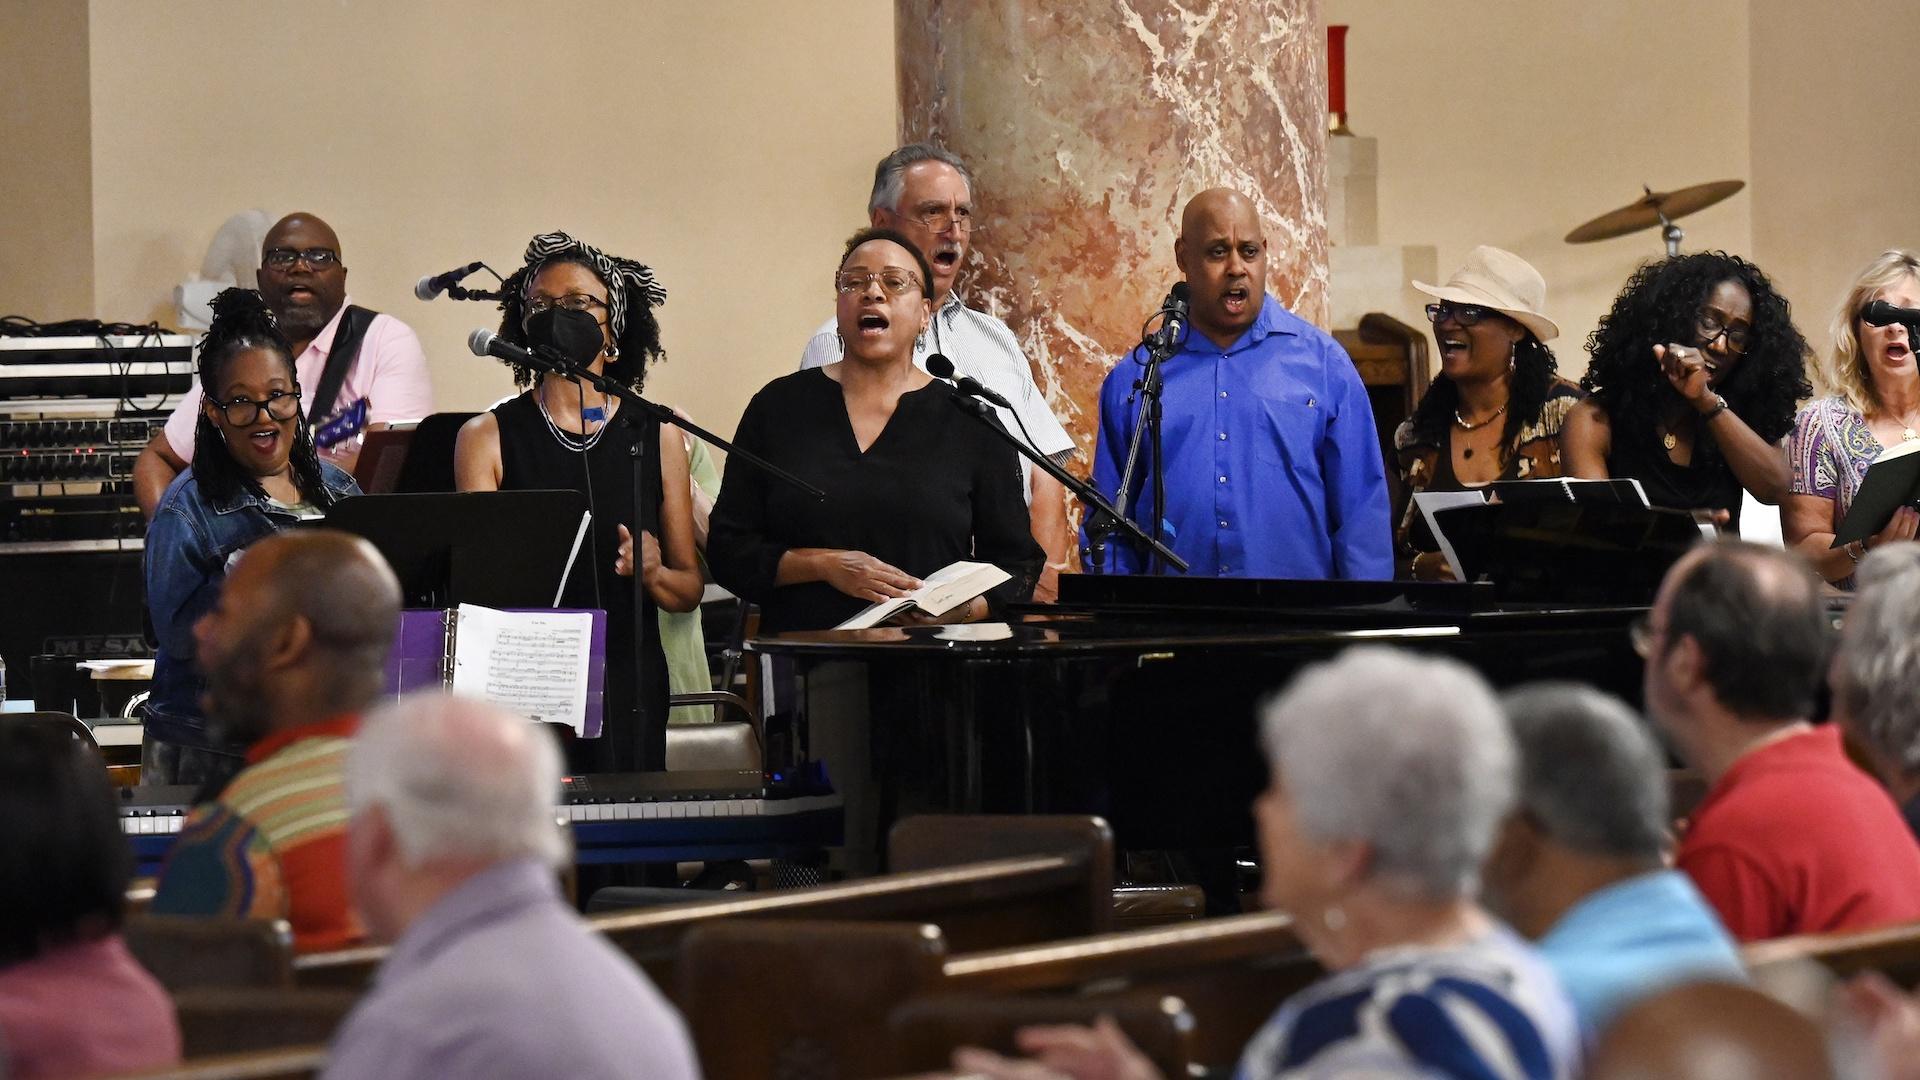 The Gesu Choir, standing, is cheered on by the congregation as they sing during Mass, Sunday, June 18, 2023, at Gesu Catholic Church in Detroit. (AP Photo/Jose Juarez)